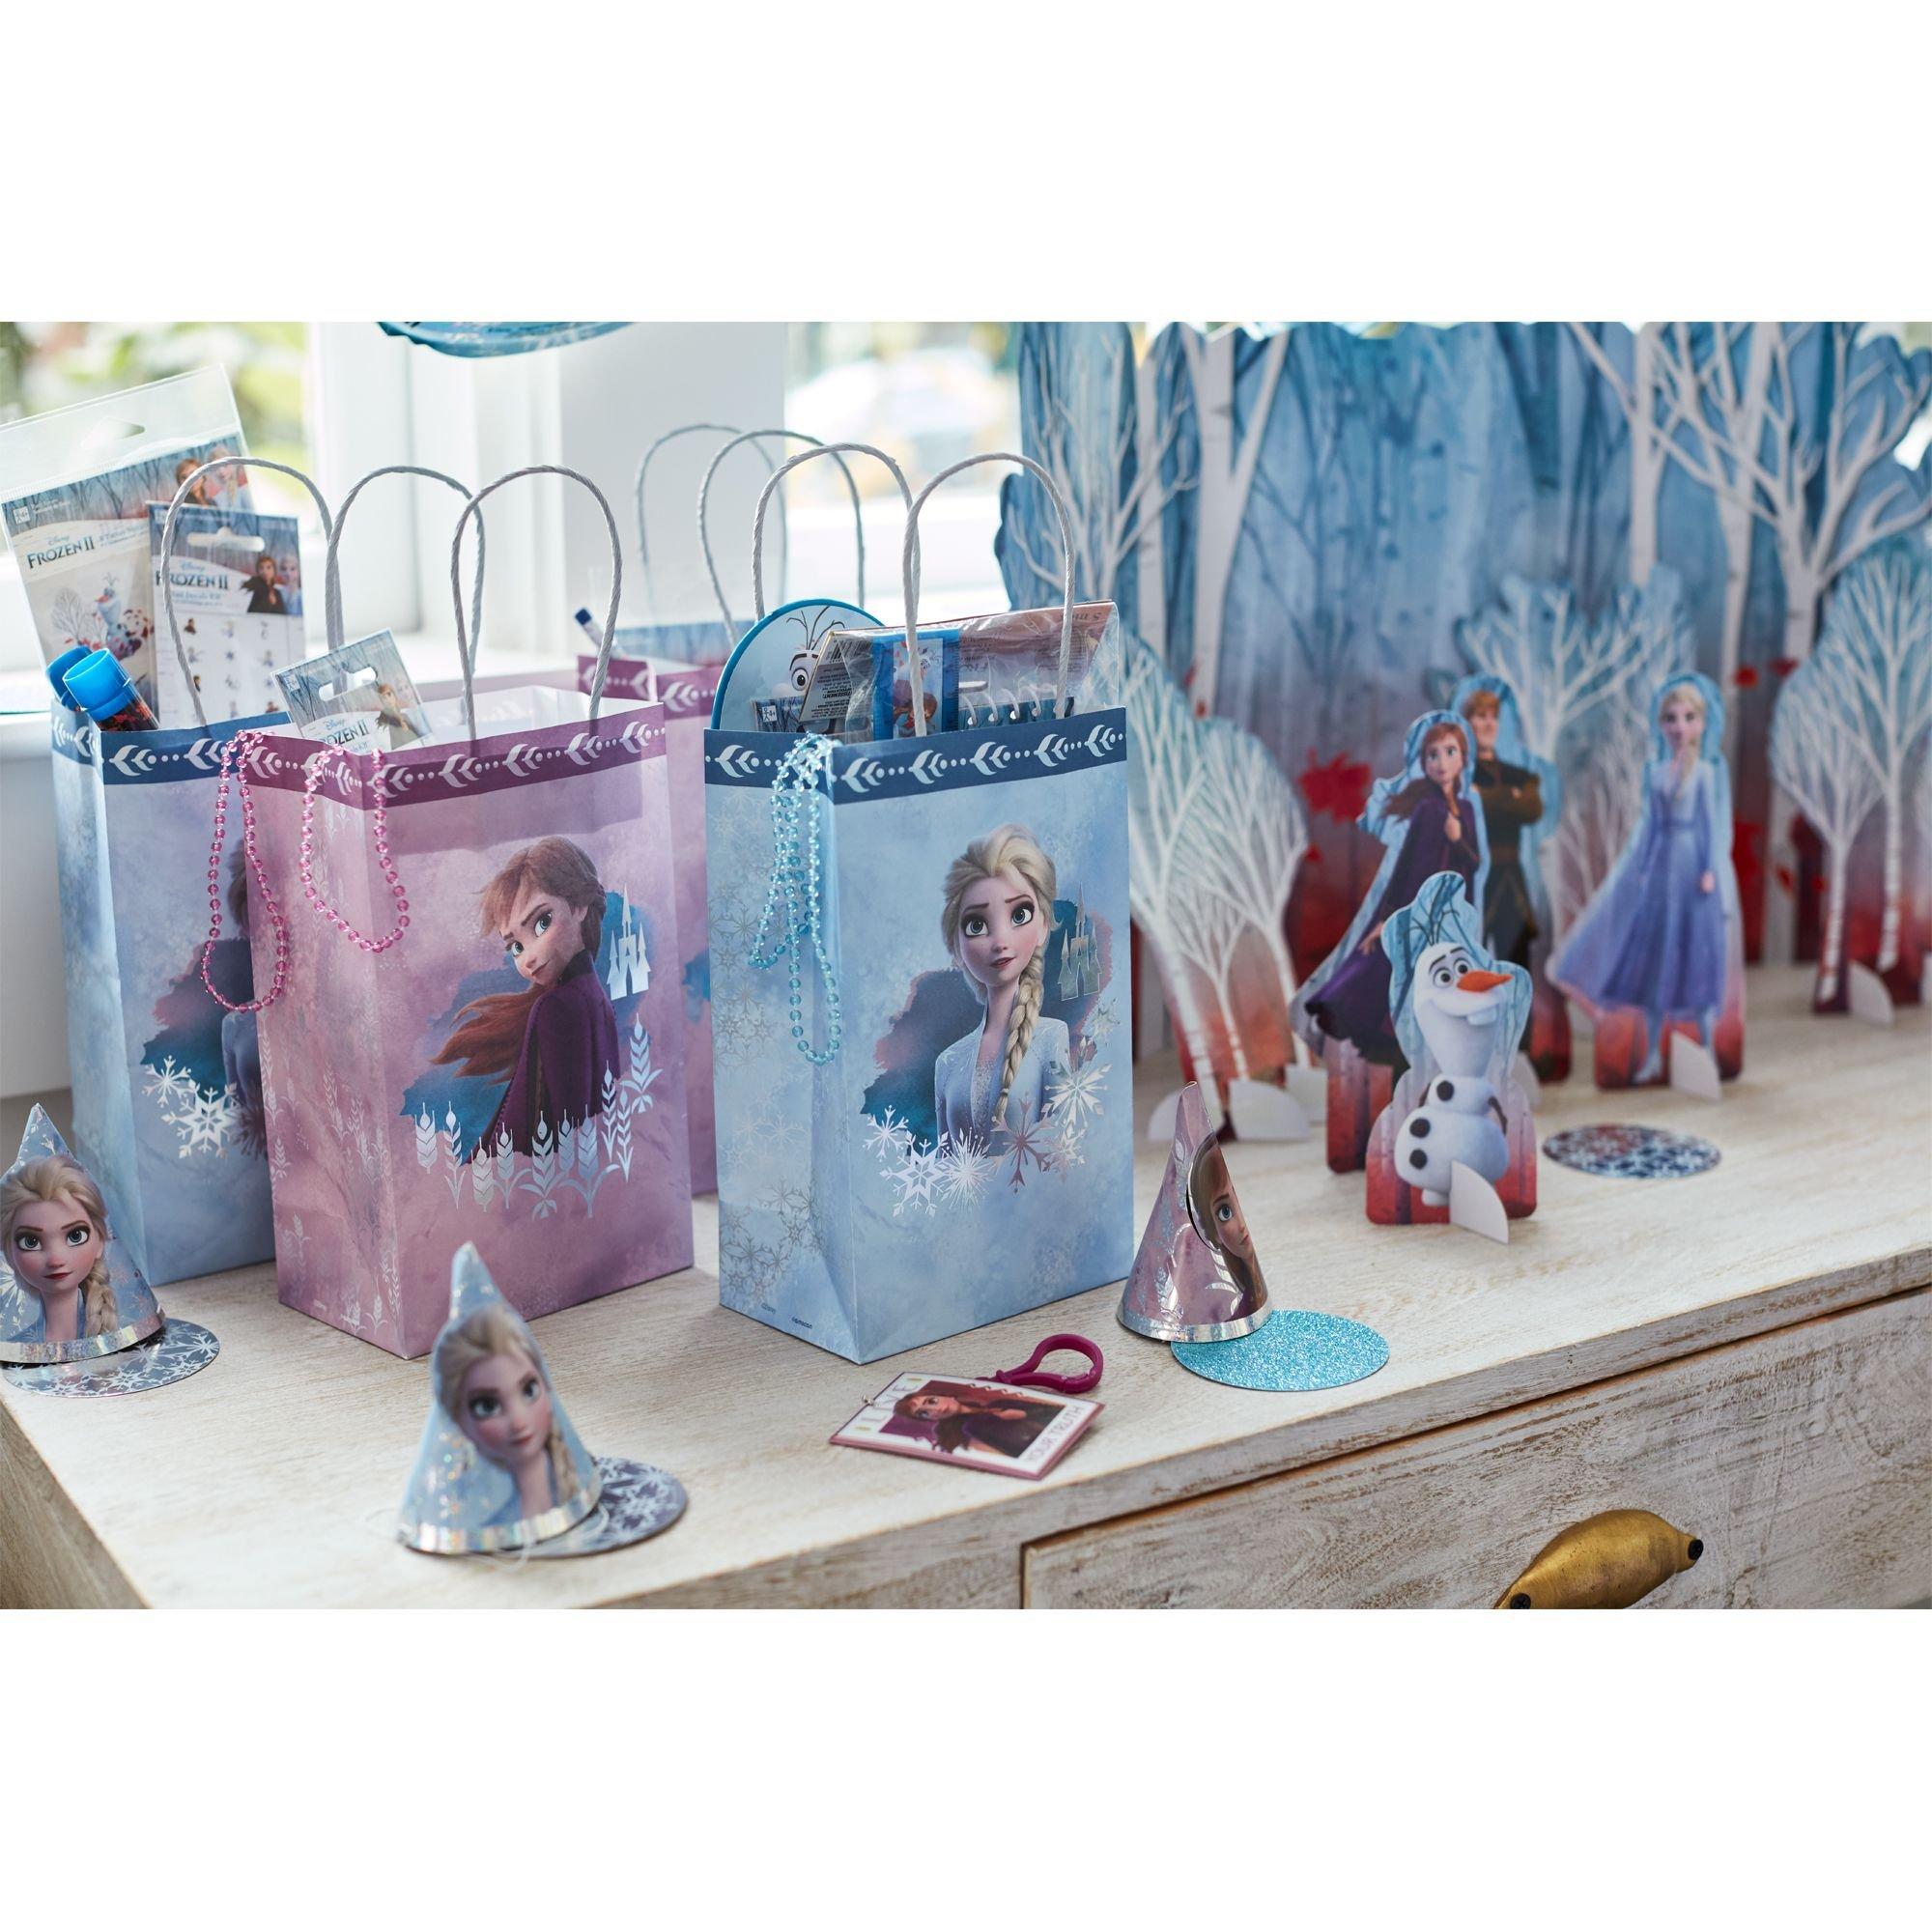 Frozen Goodie bags Good Quality Reusable Party Favor and